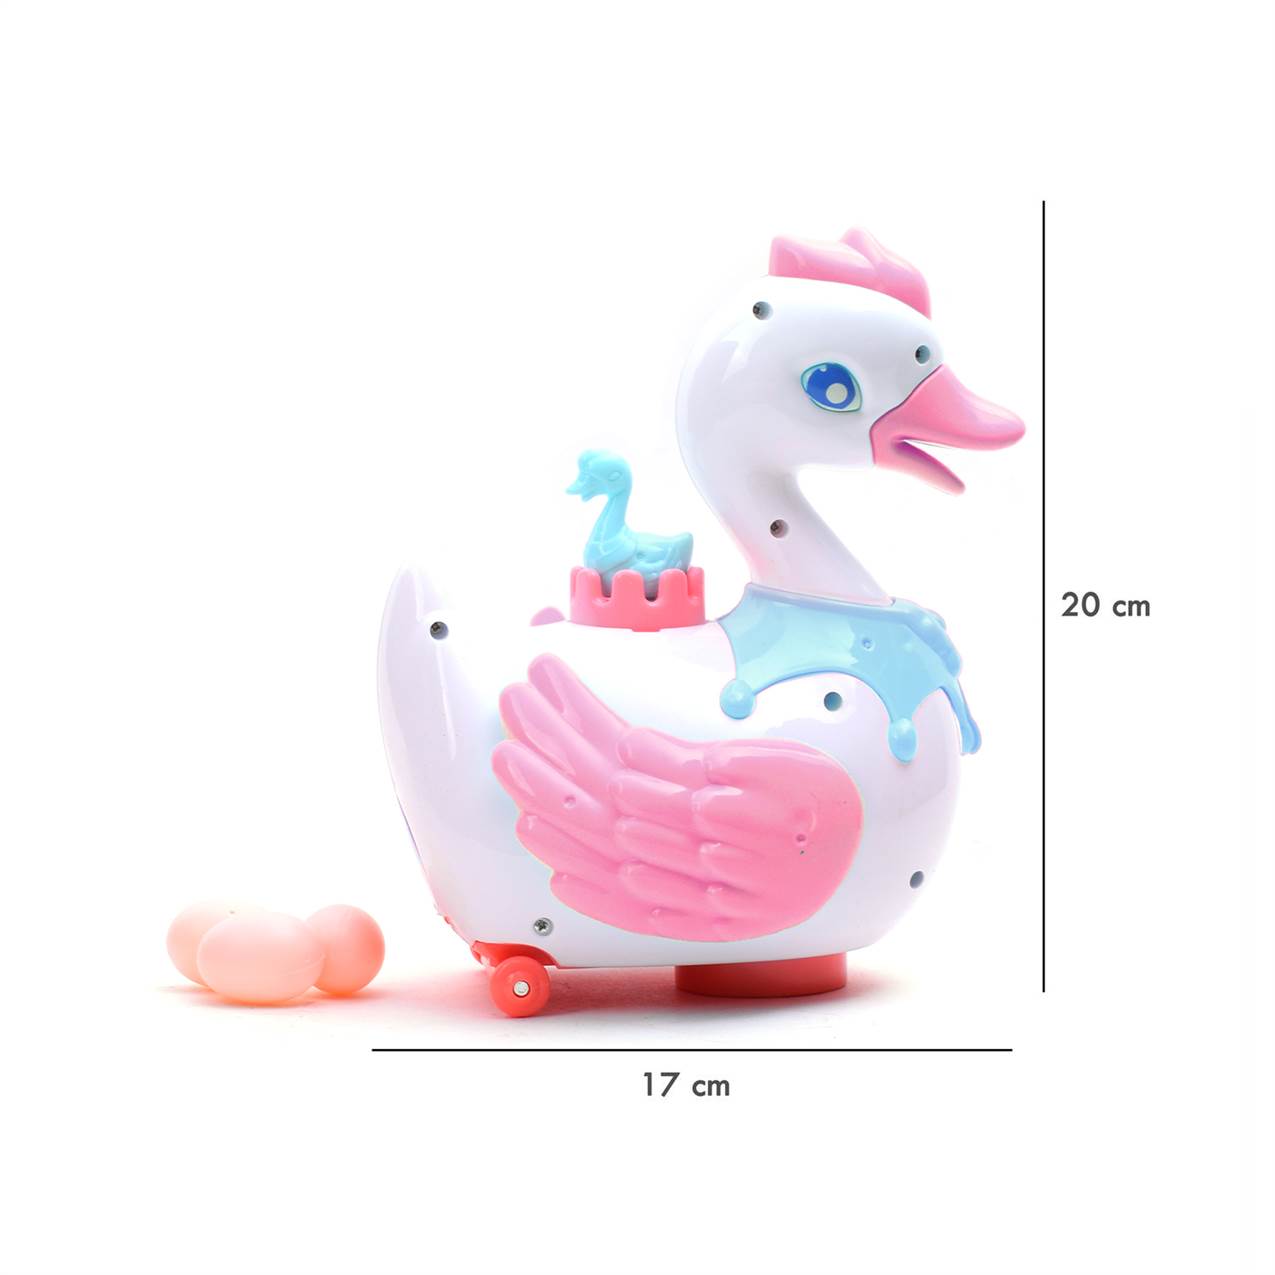 Buy Swan will Lay Eggs Battery Operated Toy Online in India at uyyaala.com